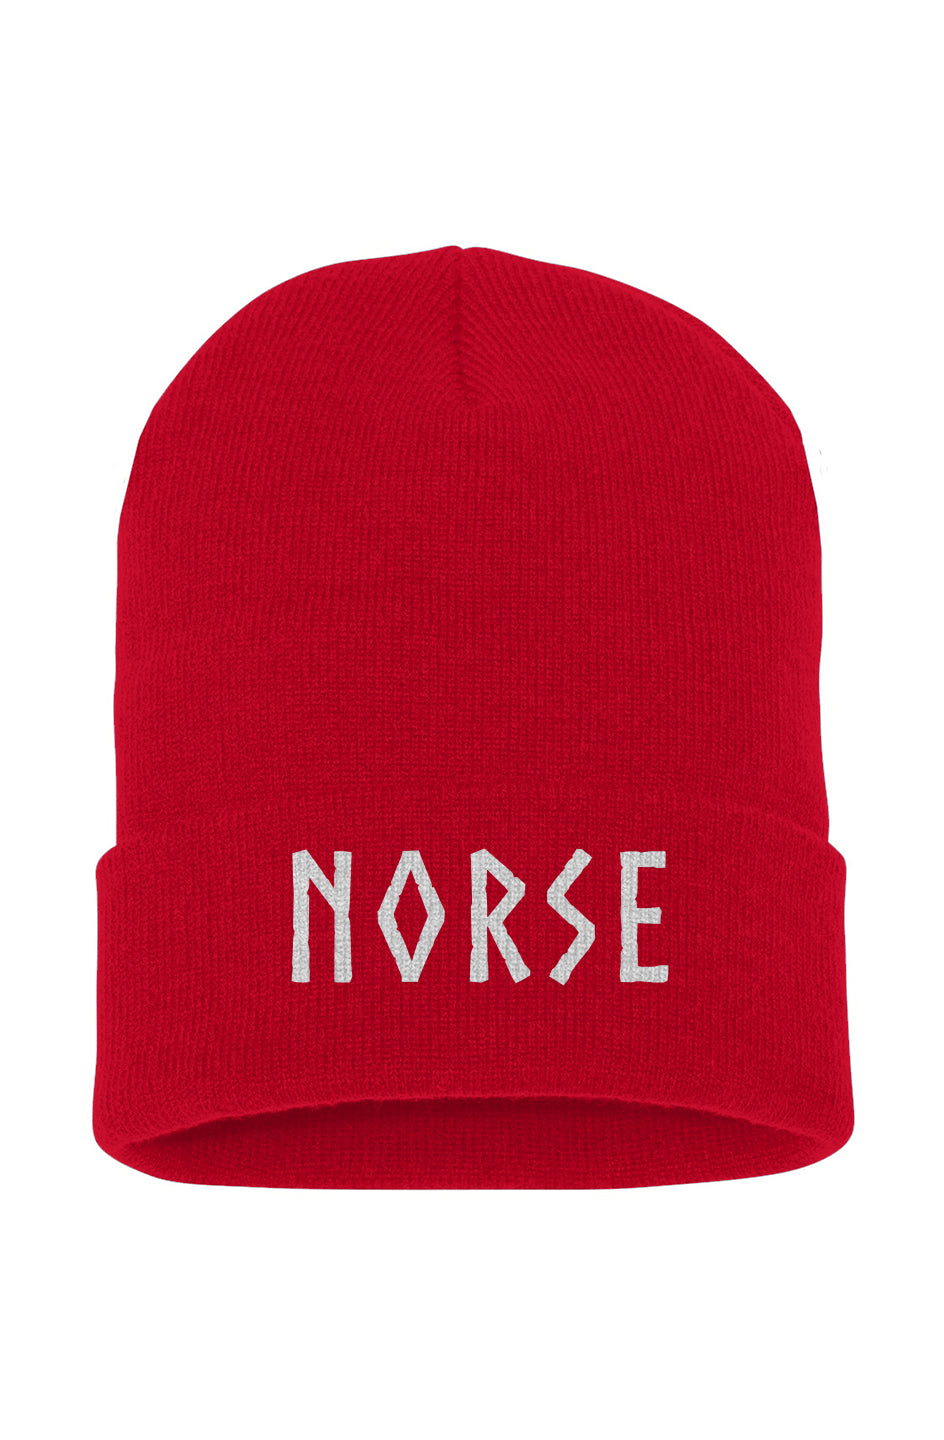 Embroidered Cuffed Beanie Red | Norse Hockey Letters